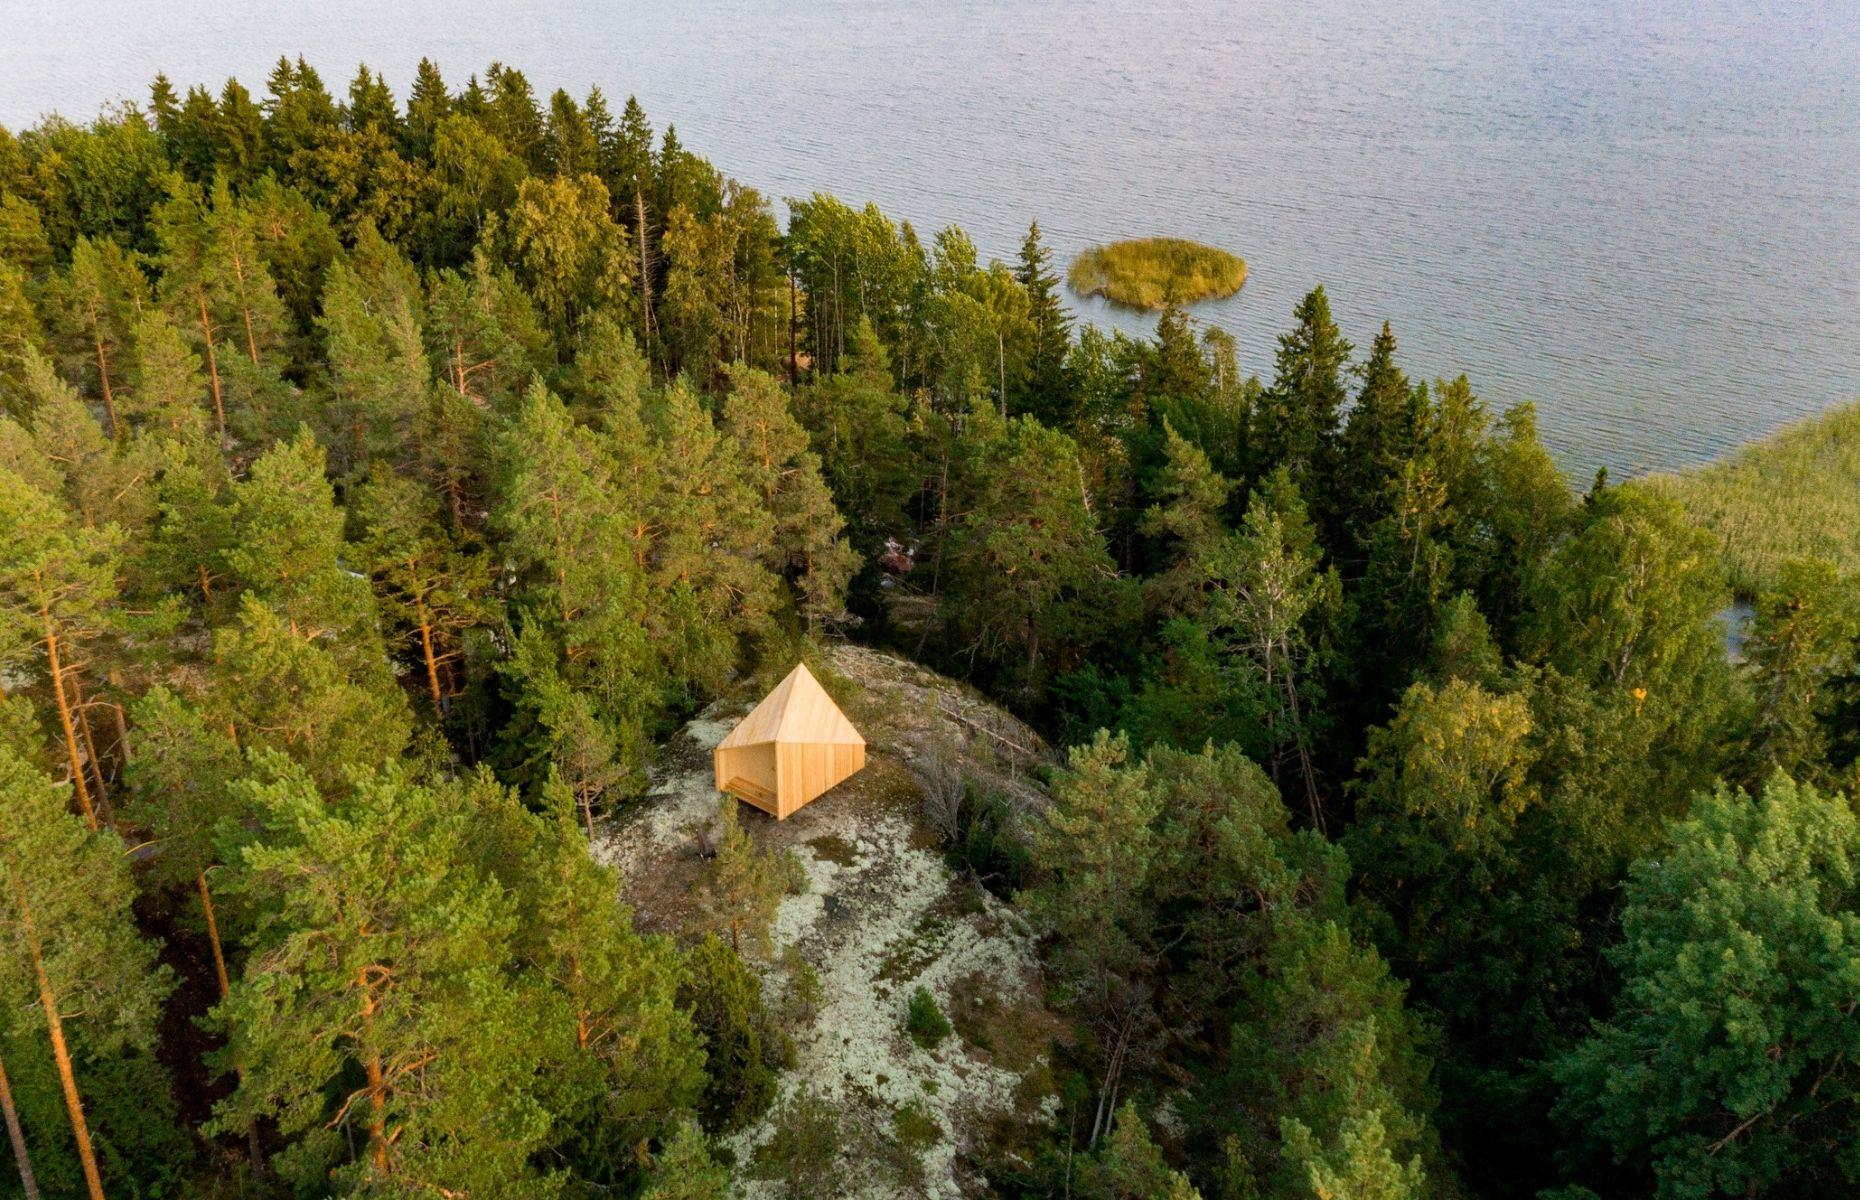 <p>The Space of Mind modular cabin was initially developed in response to the Coronavirus crisis. With people spending more time at home, the architects at <a href="https://studiopuisto.fi/fi/">Studio Puisto</a> in Finland wanted to create a movable cabin that would redefine the idea of a home away from home. The team wanted the property to be adaptable, practical and suitable for almost any location, whether installed in a backyard or a forest clearing.</p>